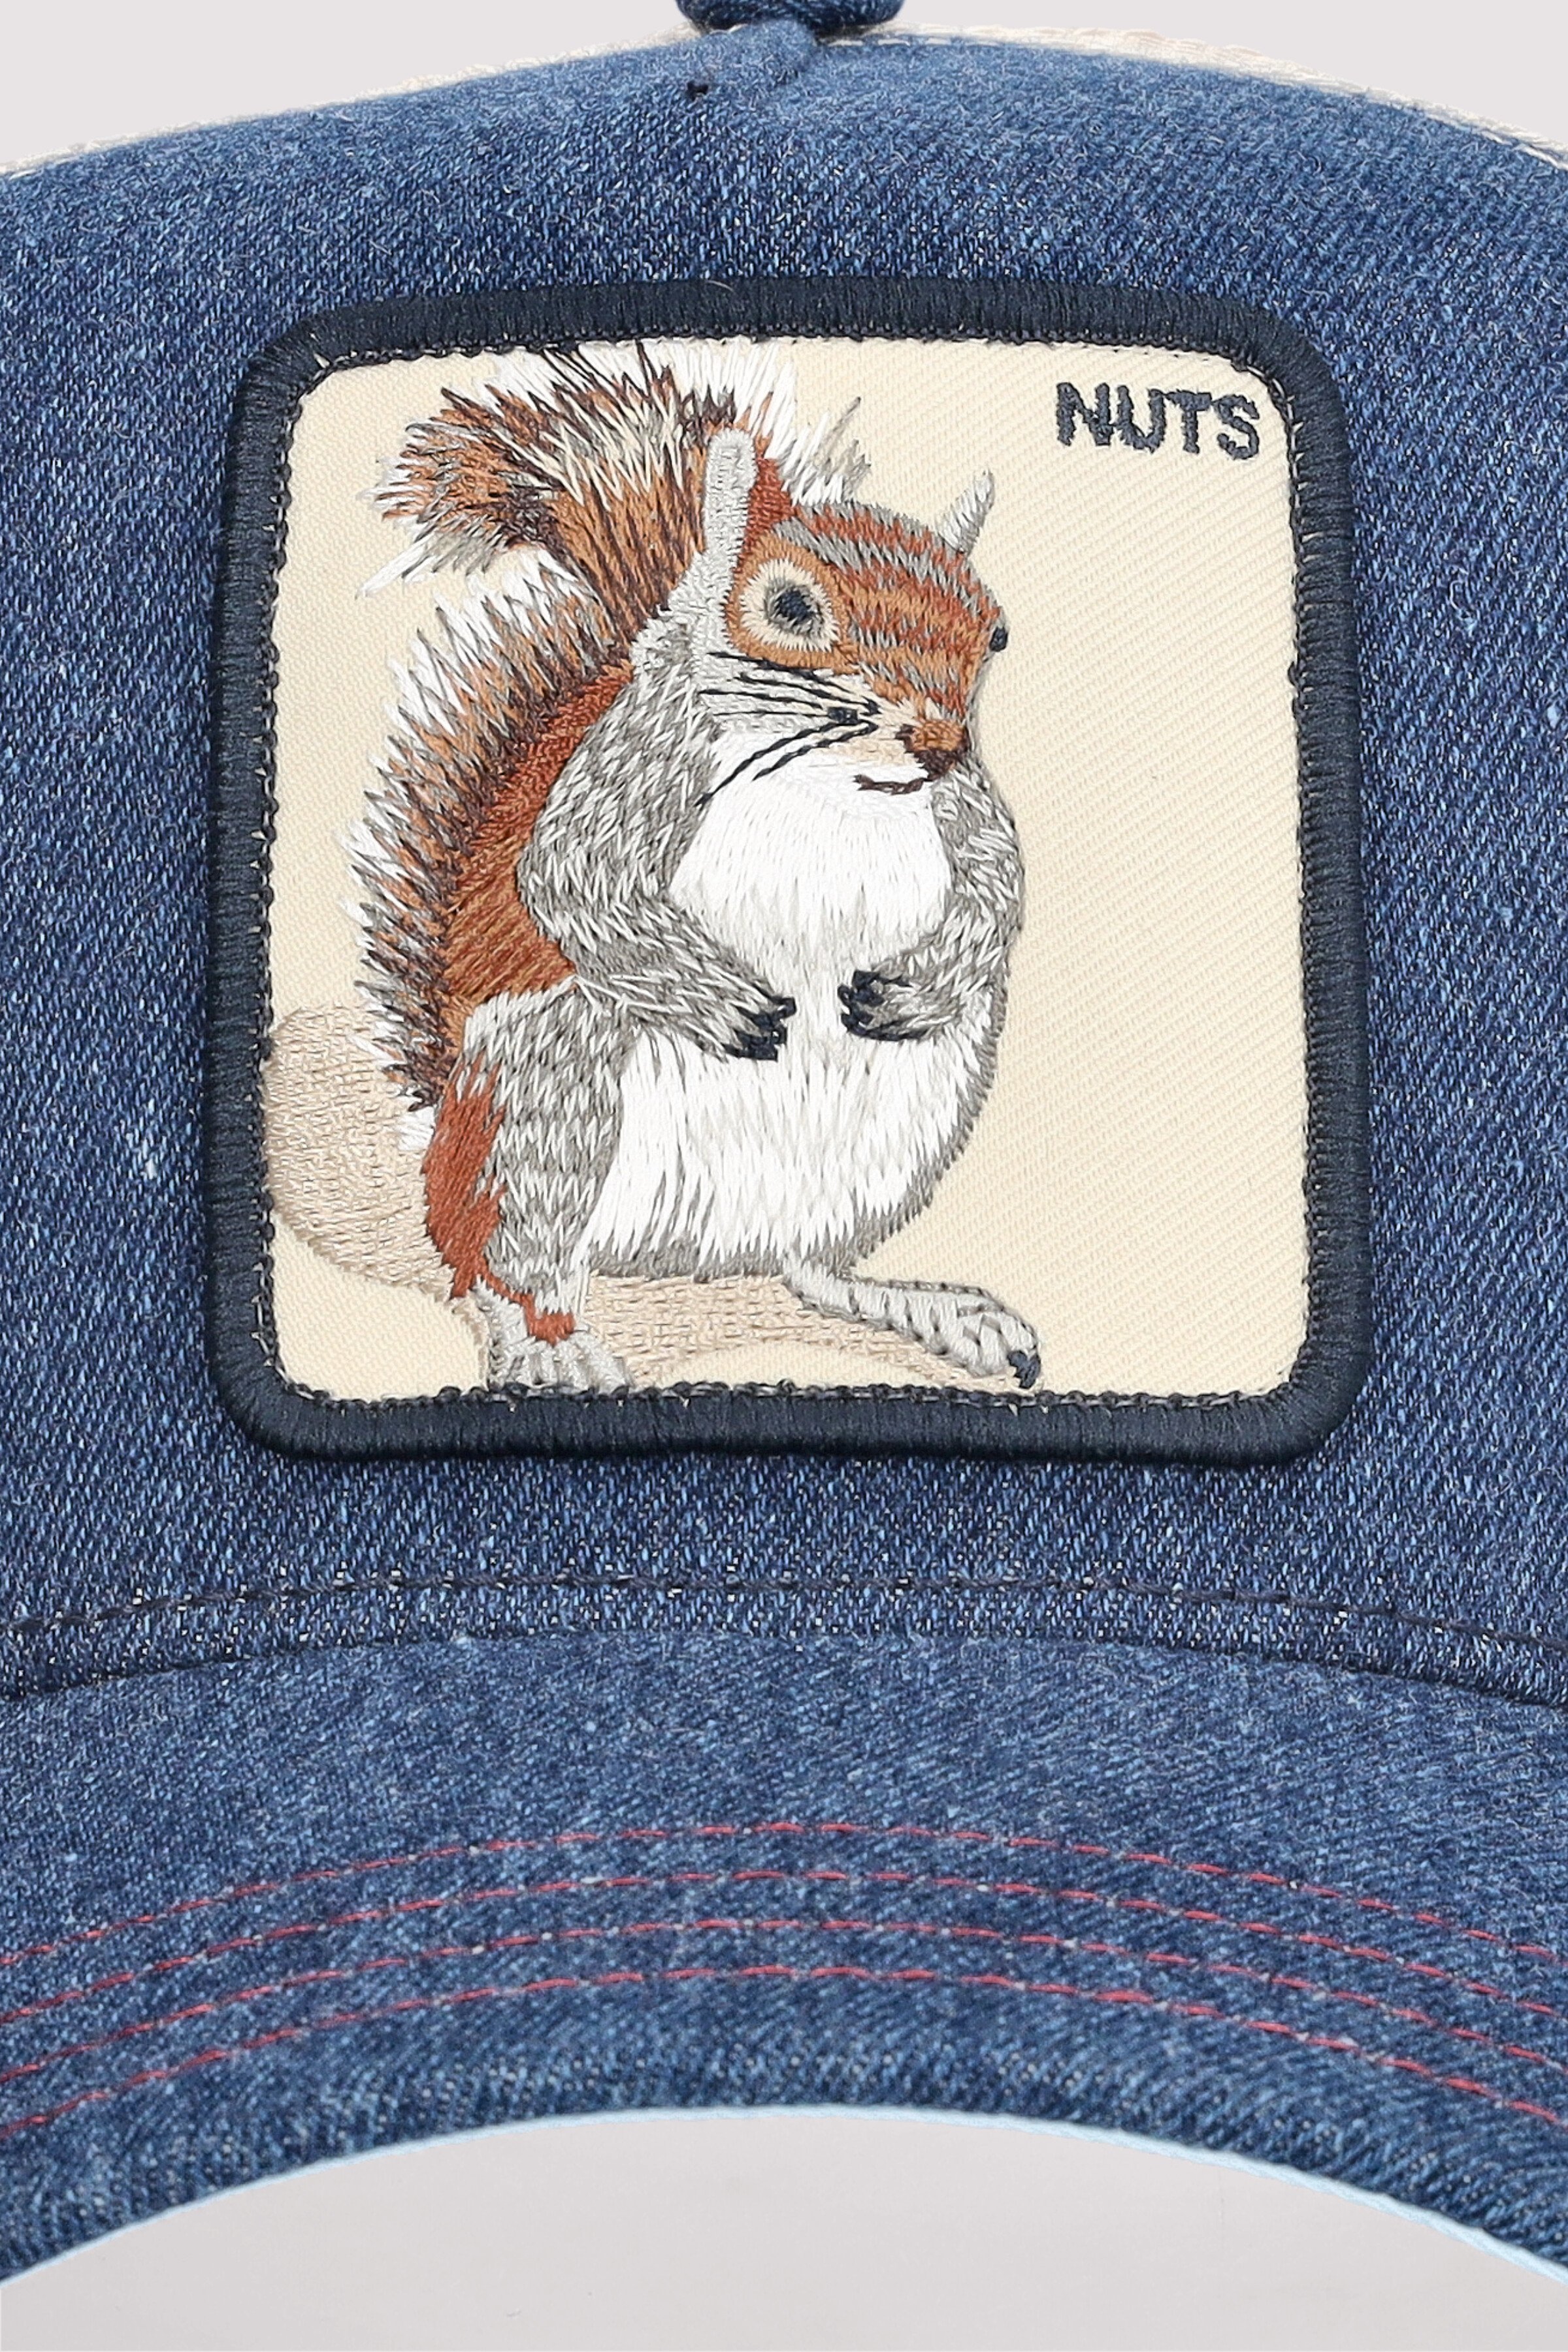 The Nuts Squirrel